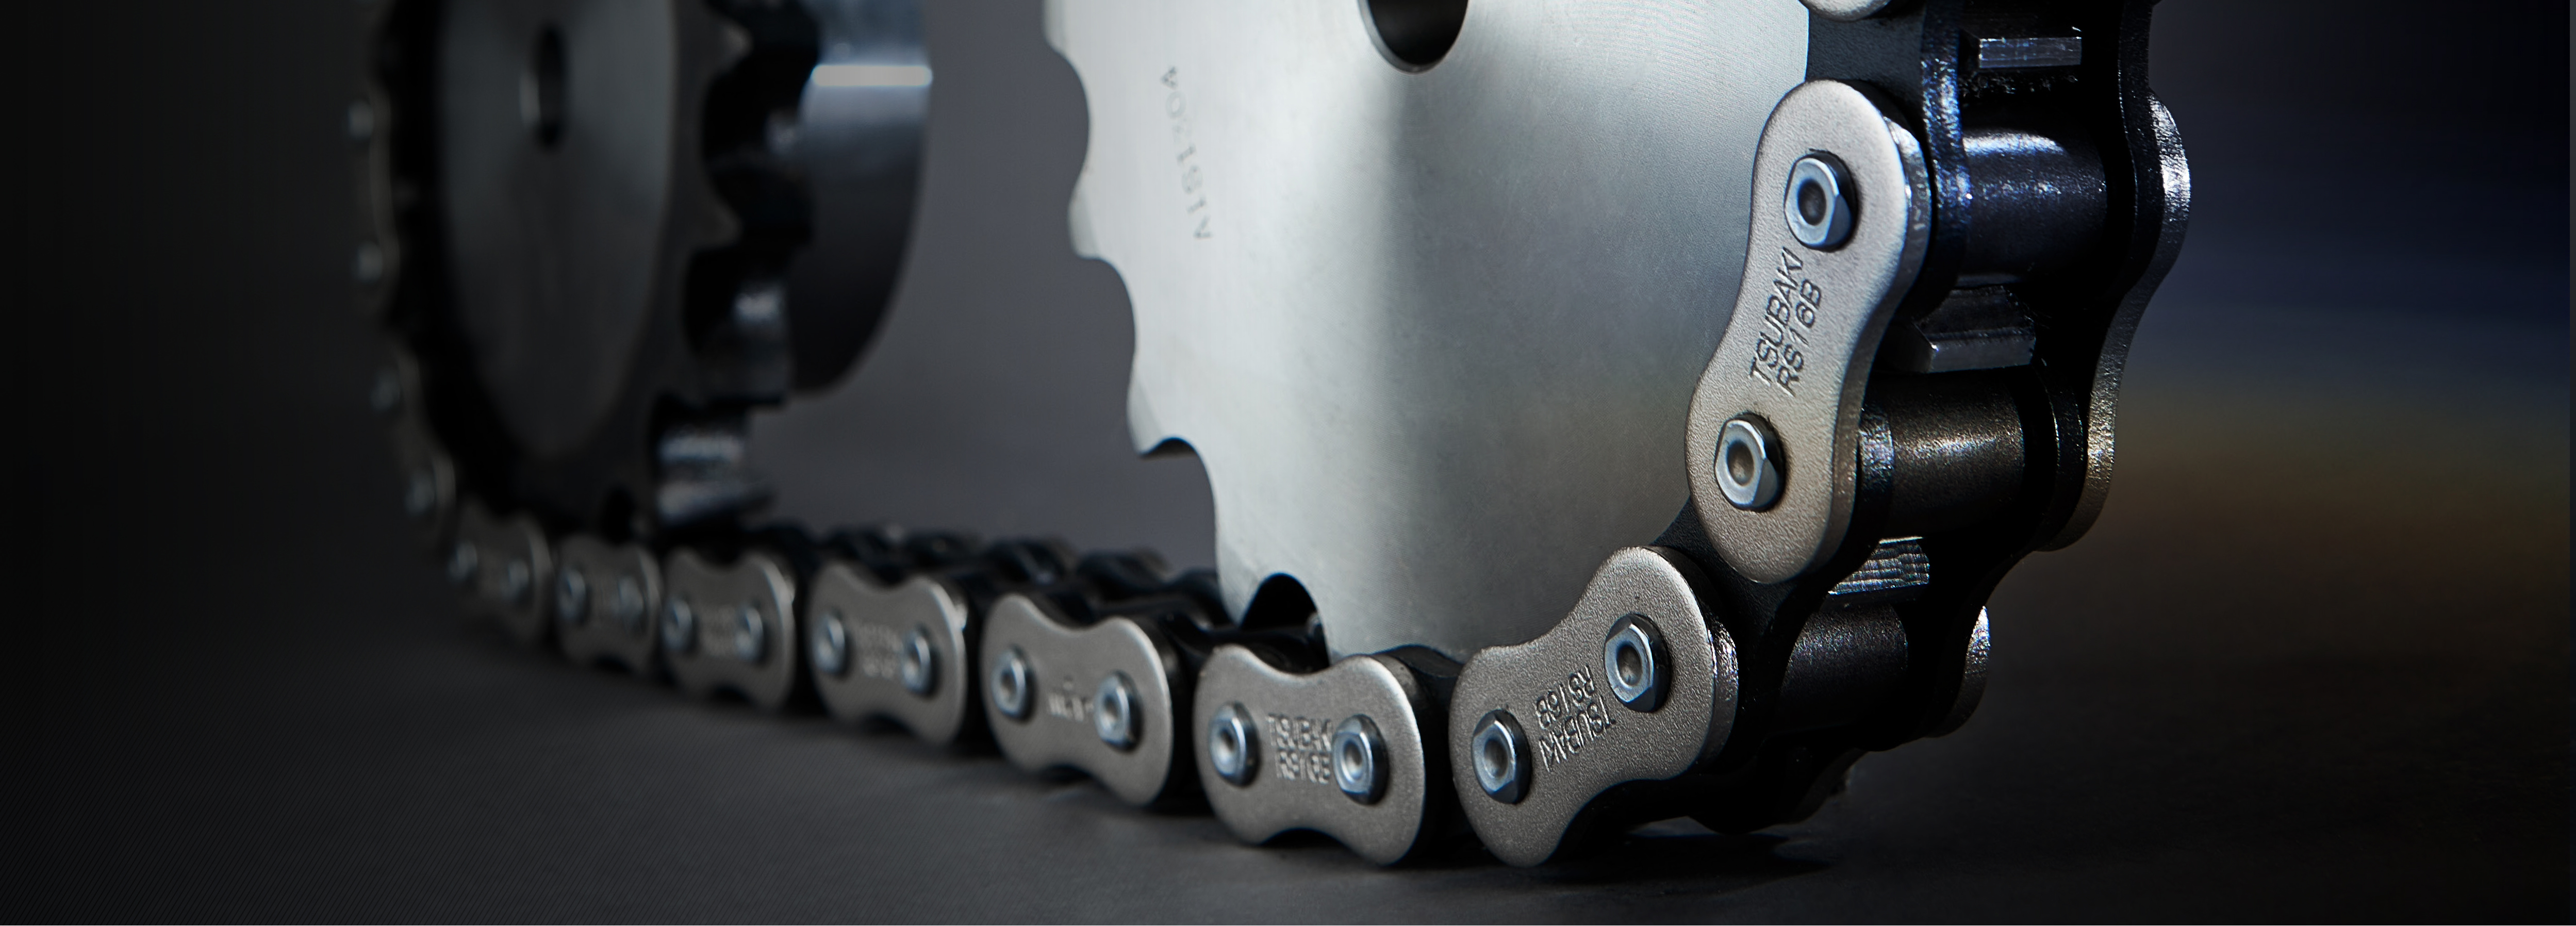 TSUBAKI Titan Chain combines the best features of the existing premium GT4 Winner chain with new specifications designed to deliver the ultimate in wear performance.